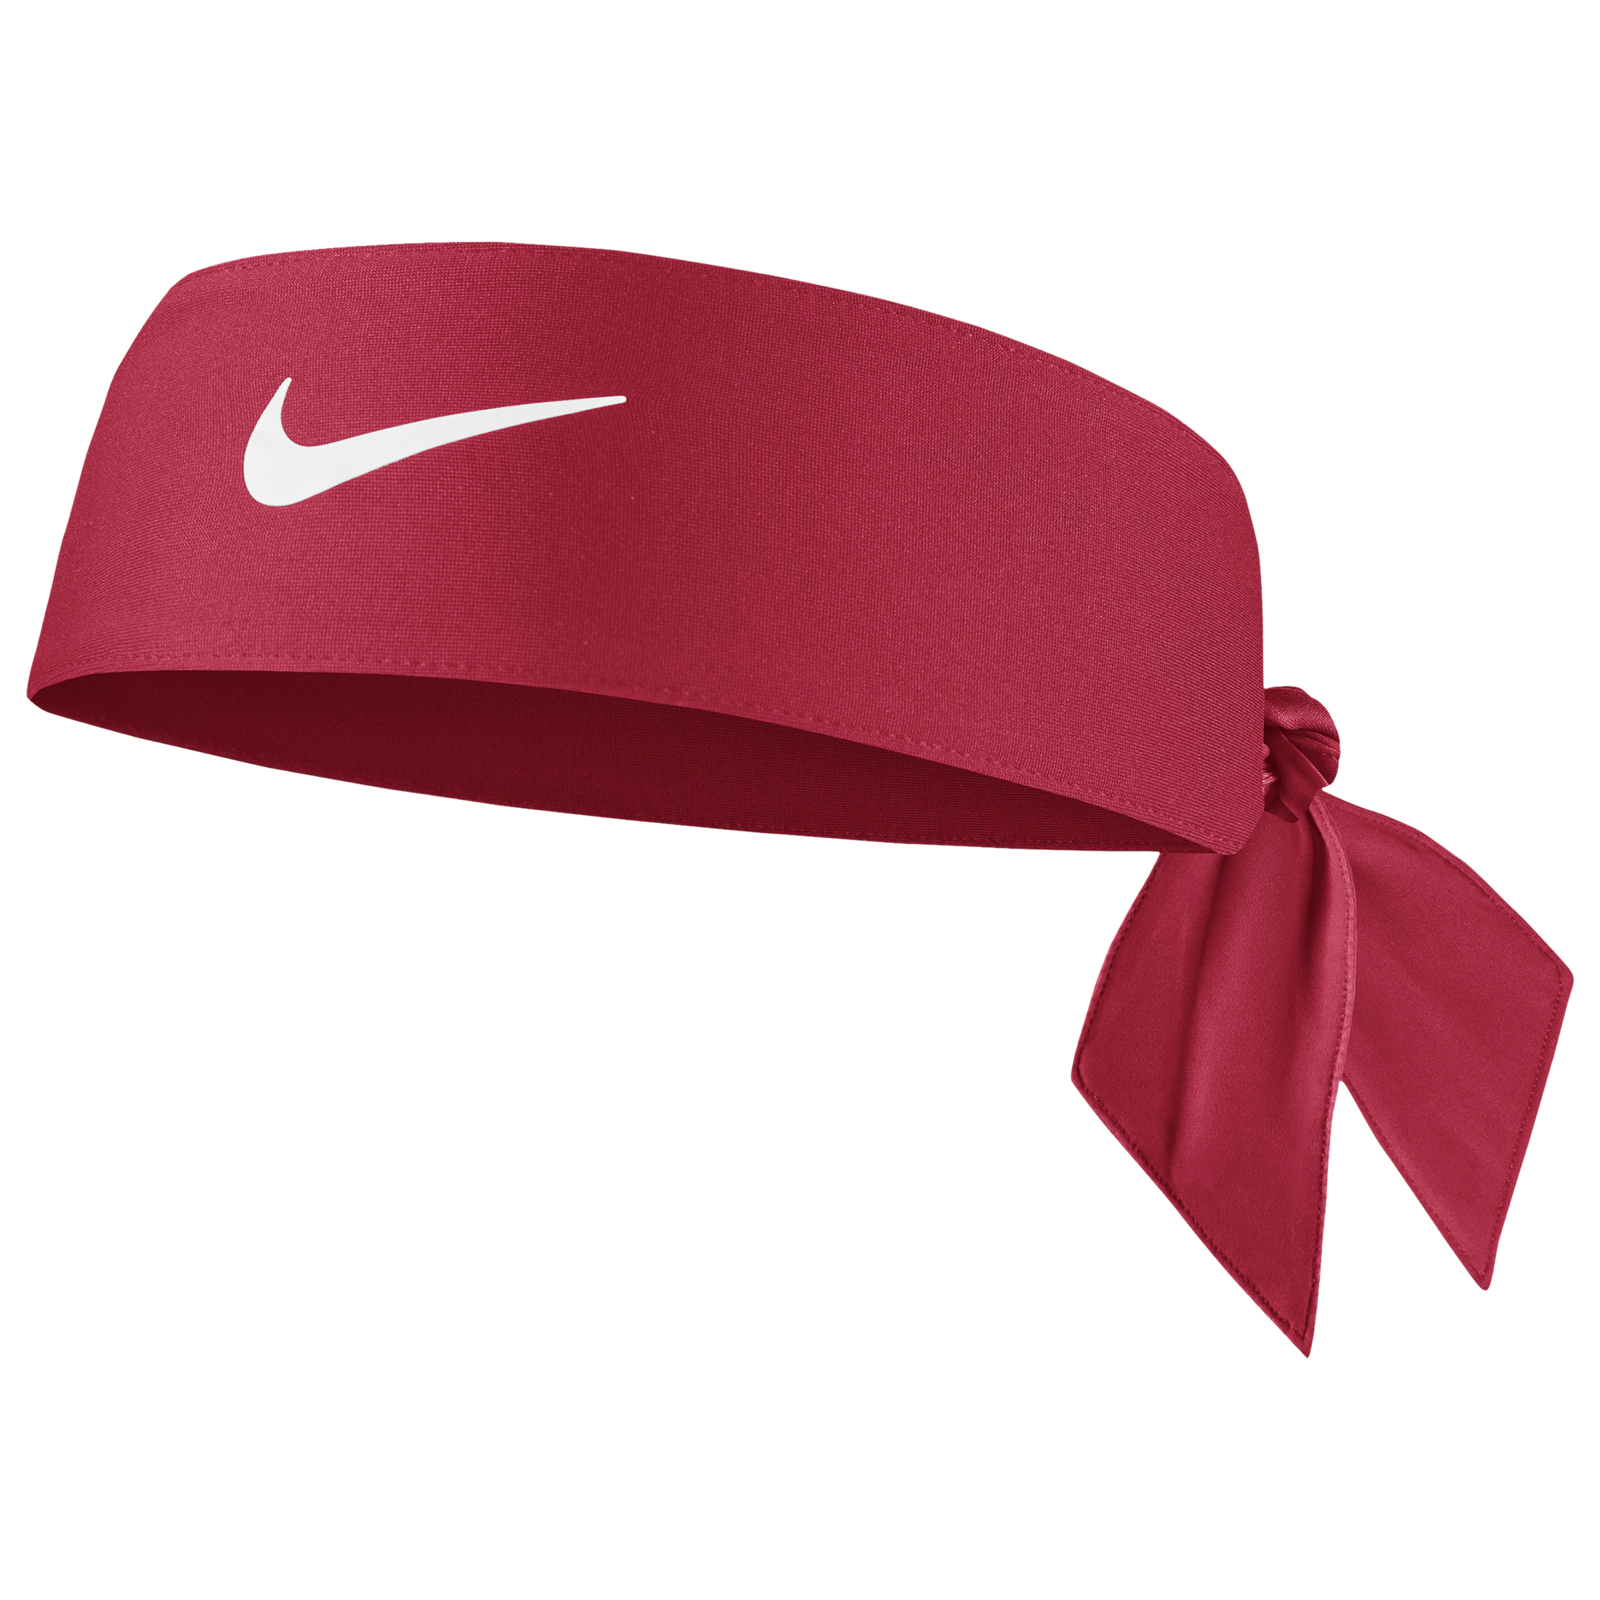 Nike Dri Fit Head White Cheap bargain Tie 4.0 Red outlet